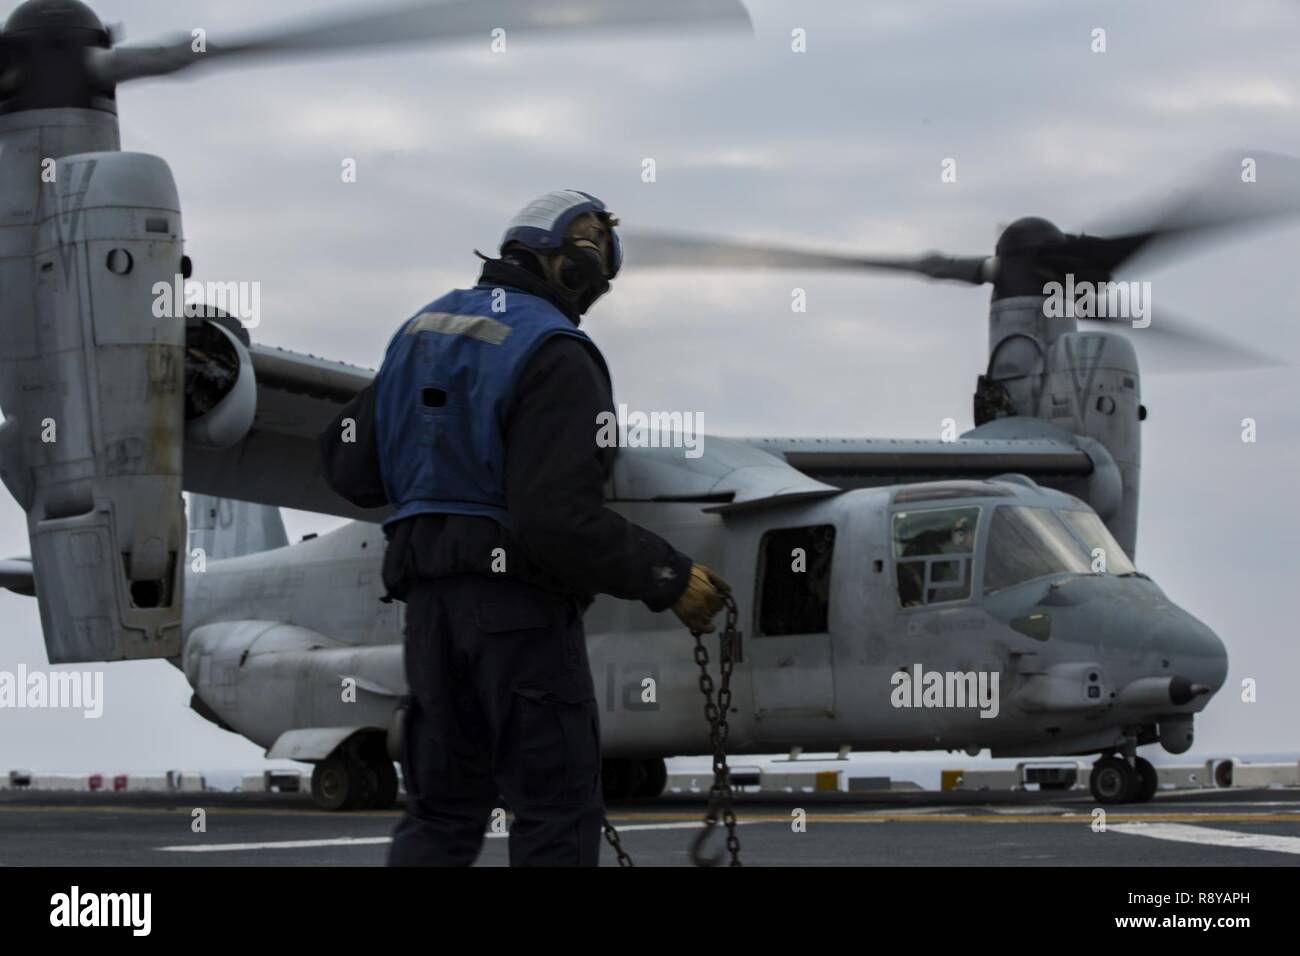 An MV-22B Osprey with Marine Medium Tiltrotor 262 (Reinforced), 31st Marine Expeditionary Unit starts propellers during flight operations in the Pacific Ocean aboard the USS Bonhomme Richard (LHD 6), March 9, 2017. Marines and Sailors of the 31st MEU embarked aboard the USS Bonhomme Richard (LHD 6), part of the Bonhomme Richard Amphibious Readiness Group, as part of their annual spring patrol of the Indo-Asia-Pacific region. The 31st MEU, embarked on the amphibious ships of the Expeditionary Strike Group 7, has the capability to respond to any crisis or contingency at a moment’s notice. Stock Photo